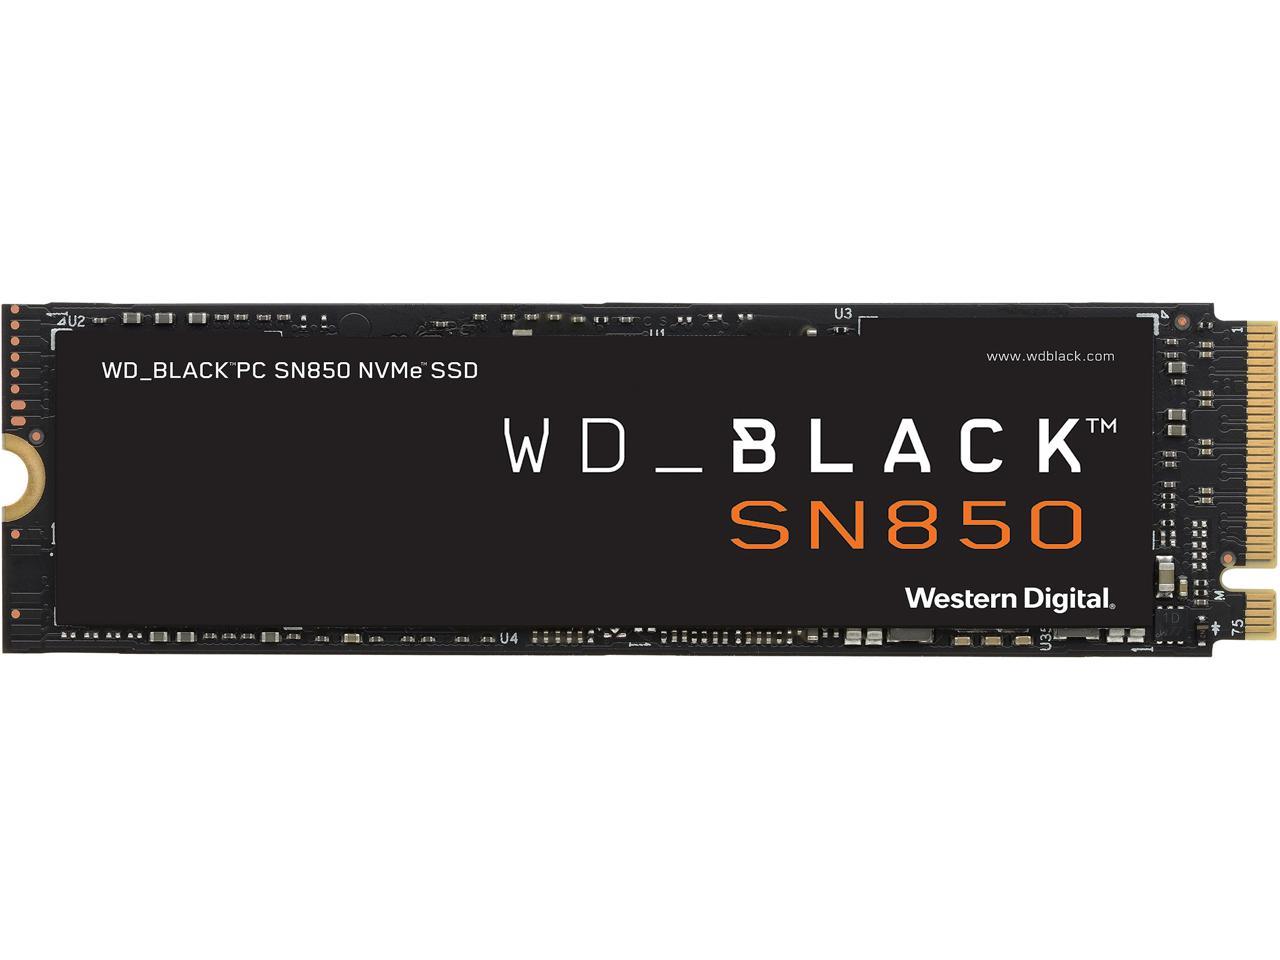 2TB WD Black SN850 NVMe Internal Solid State Drive $224.99 + Free Shipping